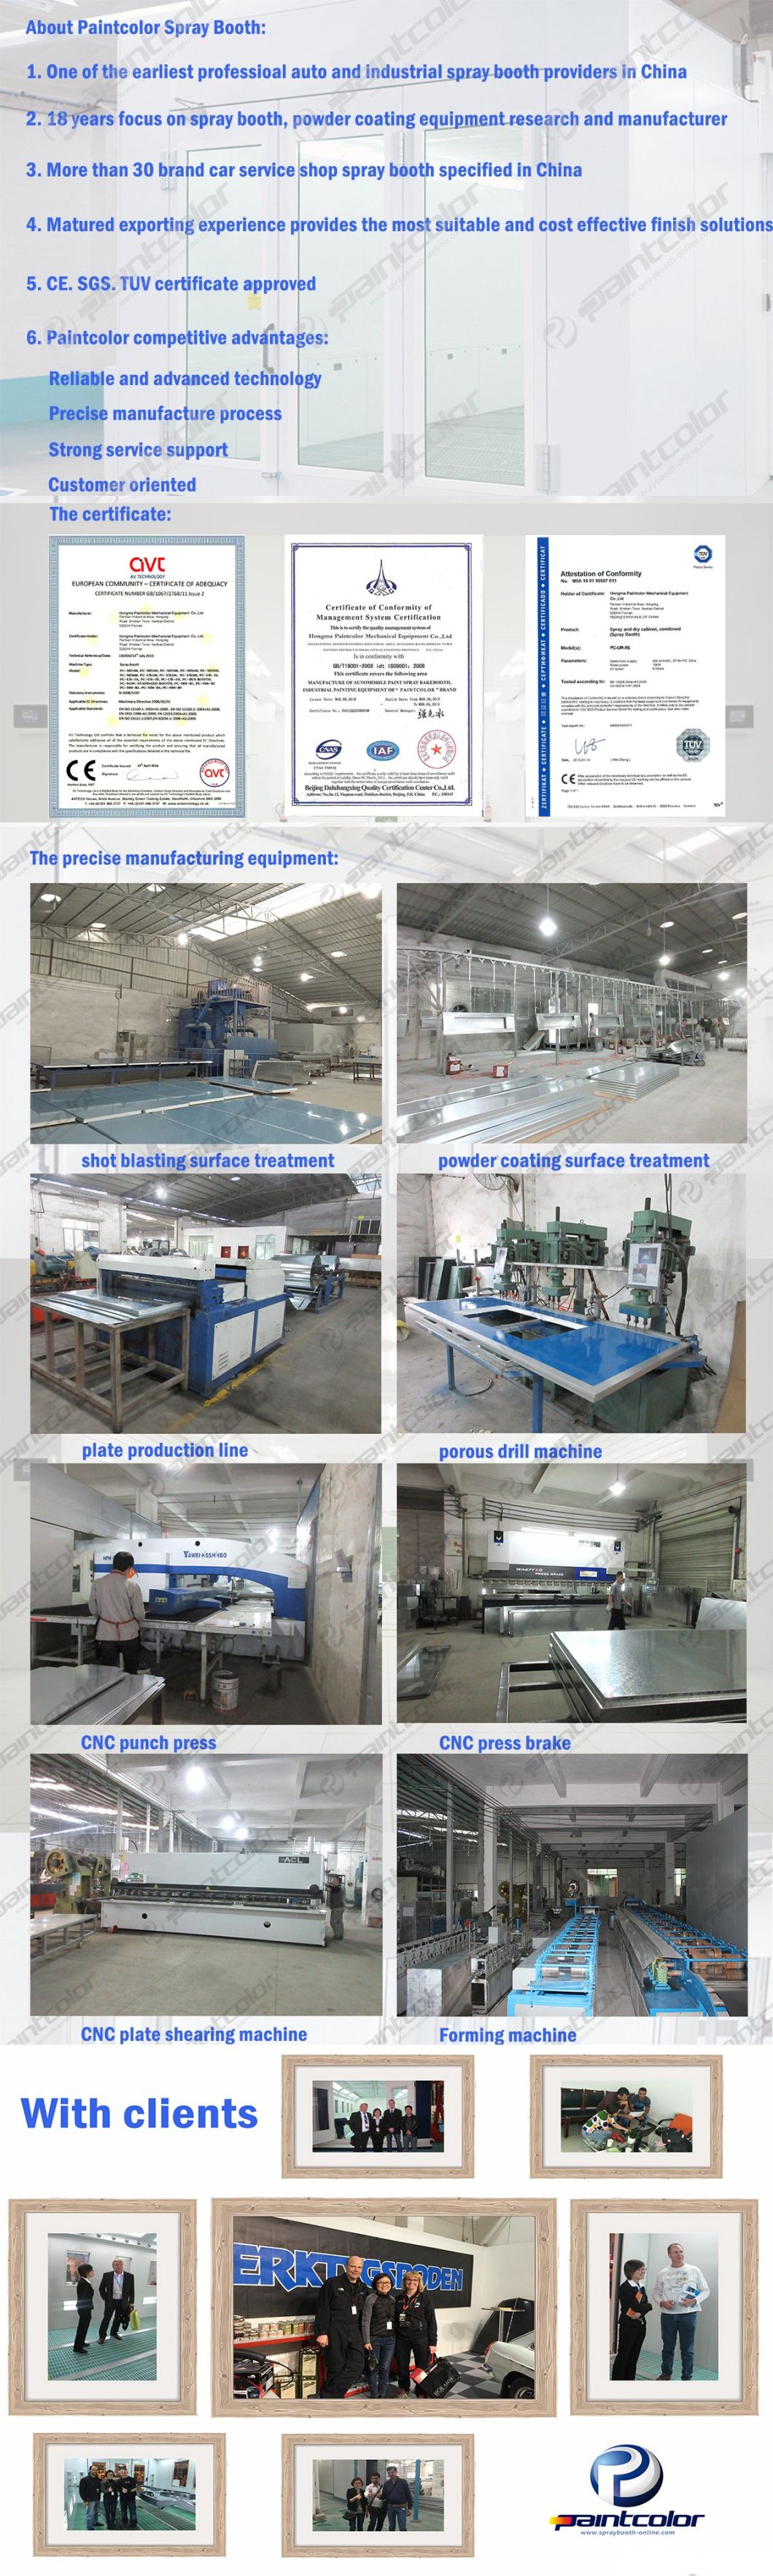 Heat Recovery Spray Booth with Ce, Europe Popular Model Exhaust Air Unit with Heat Recovery Vehicle Spraying Cabin